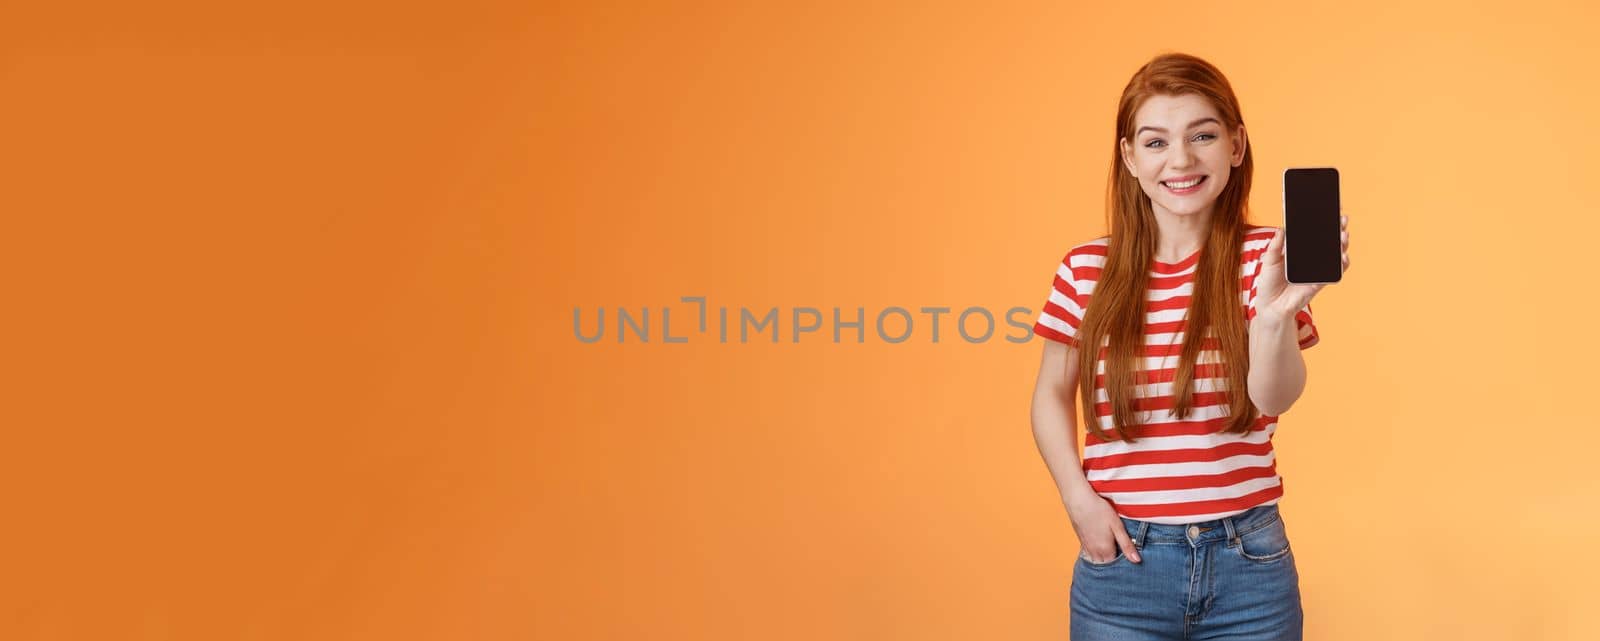 Cheerful good-looking 20s redhead woman introduce social media feature product hold smartphone, show camera cellphone display, promote device application, smiling broadly, orange background.